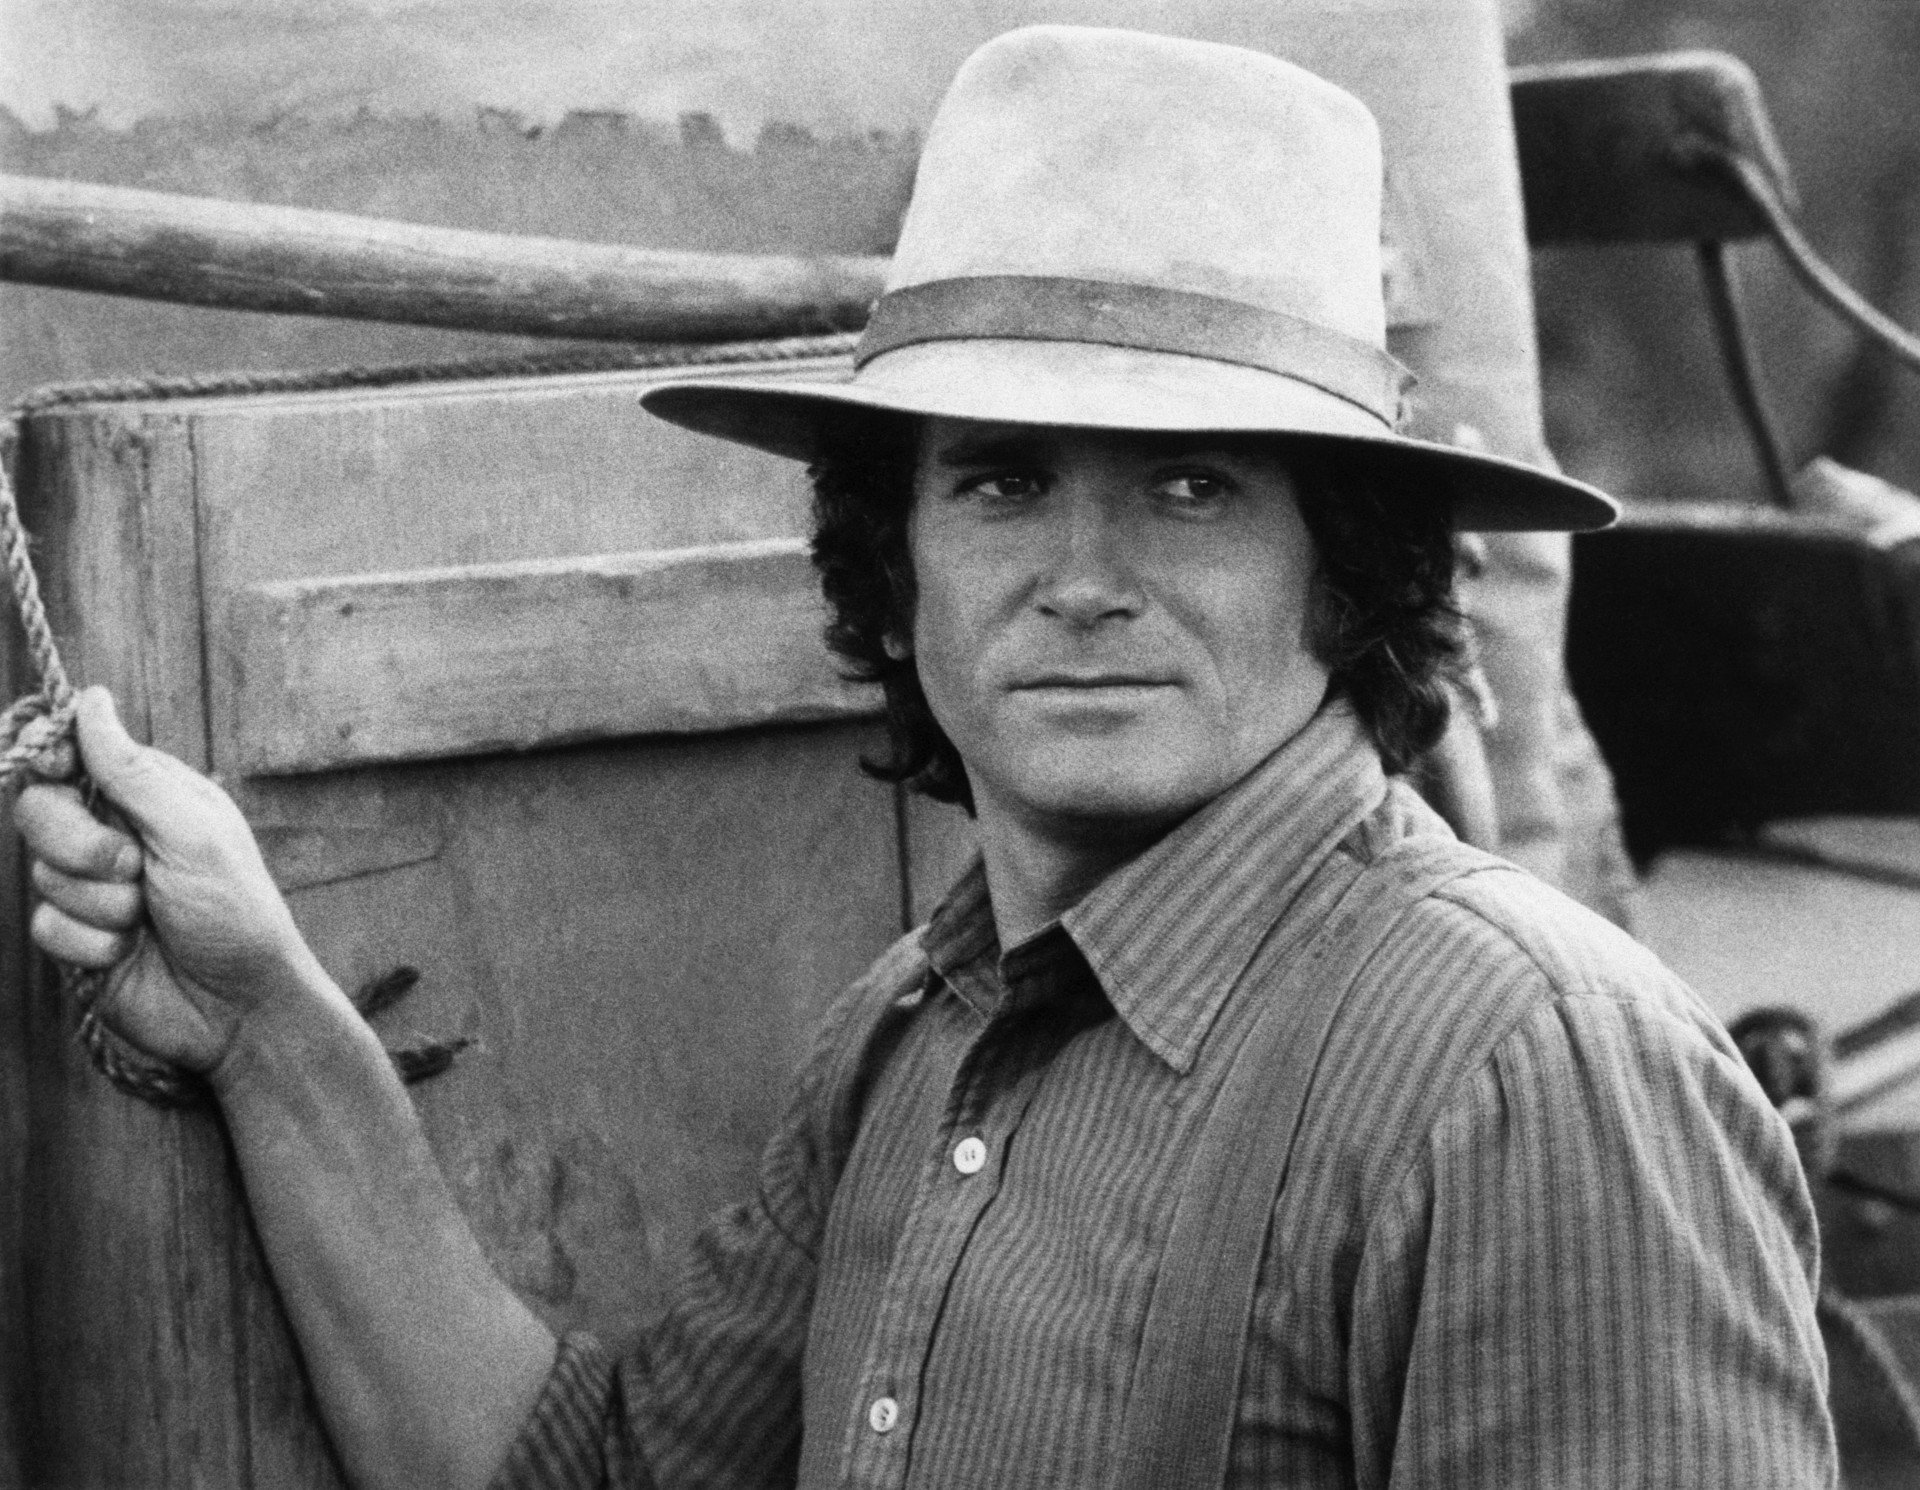 Michael Landon wears a cowboy hat on the set of Little House on the Prairie.